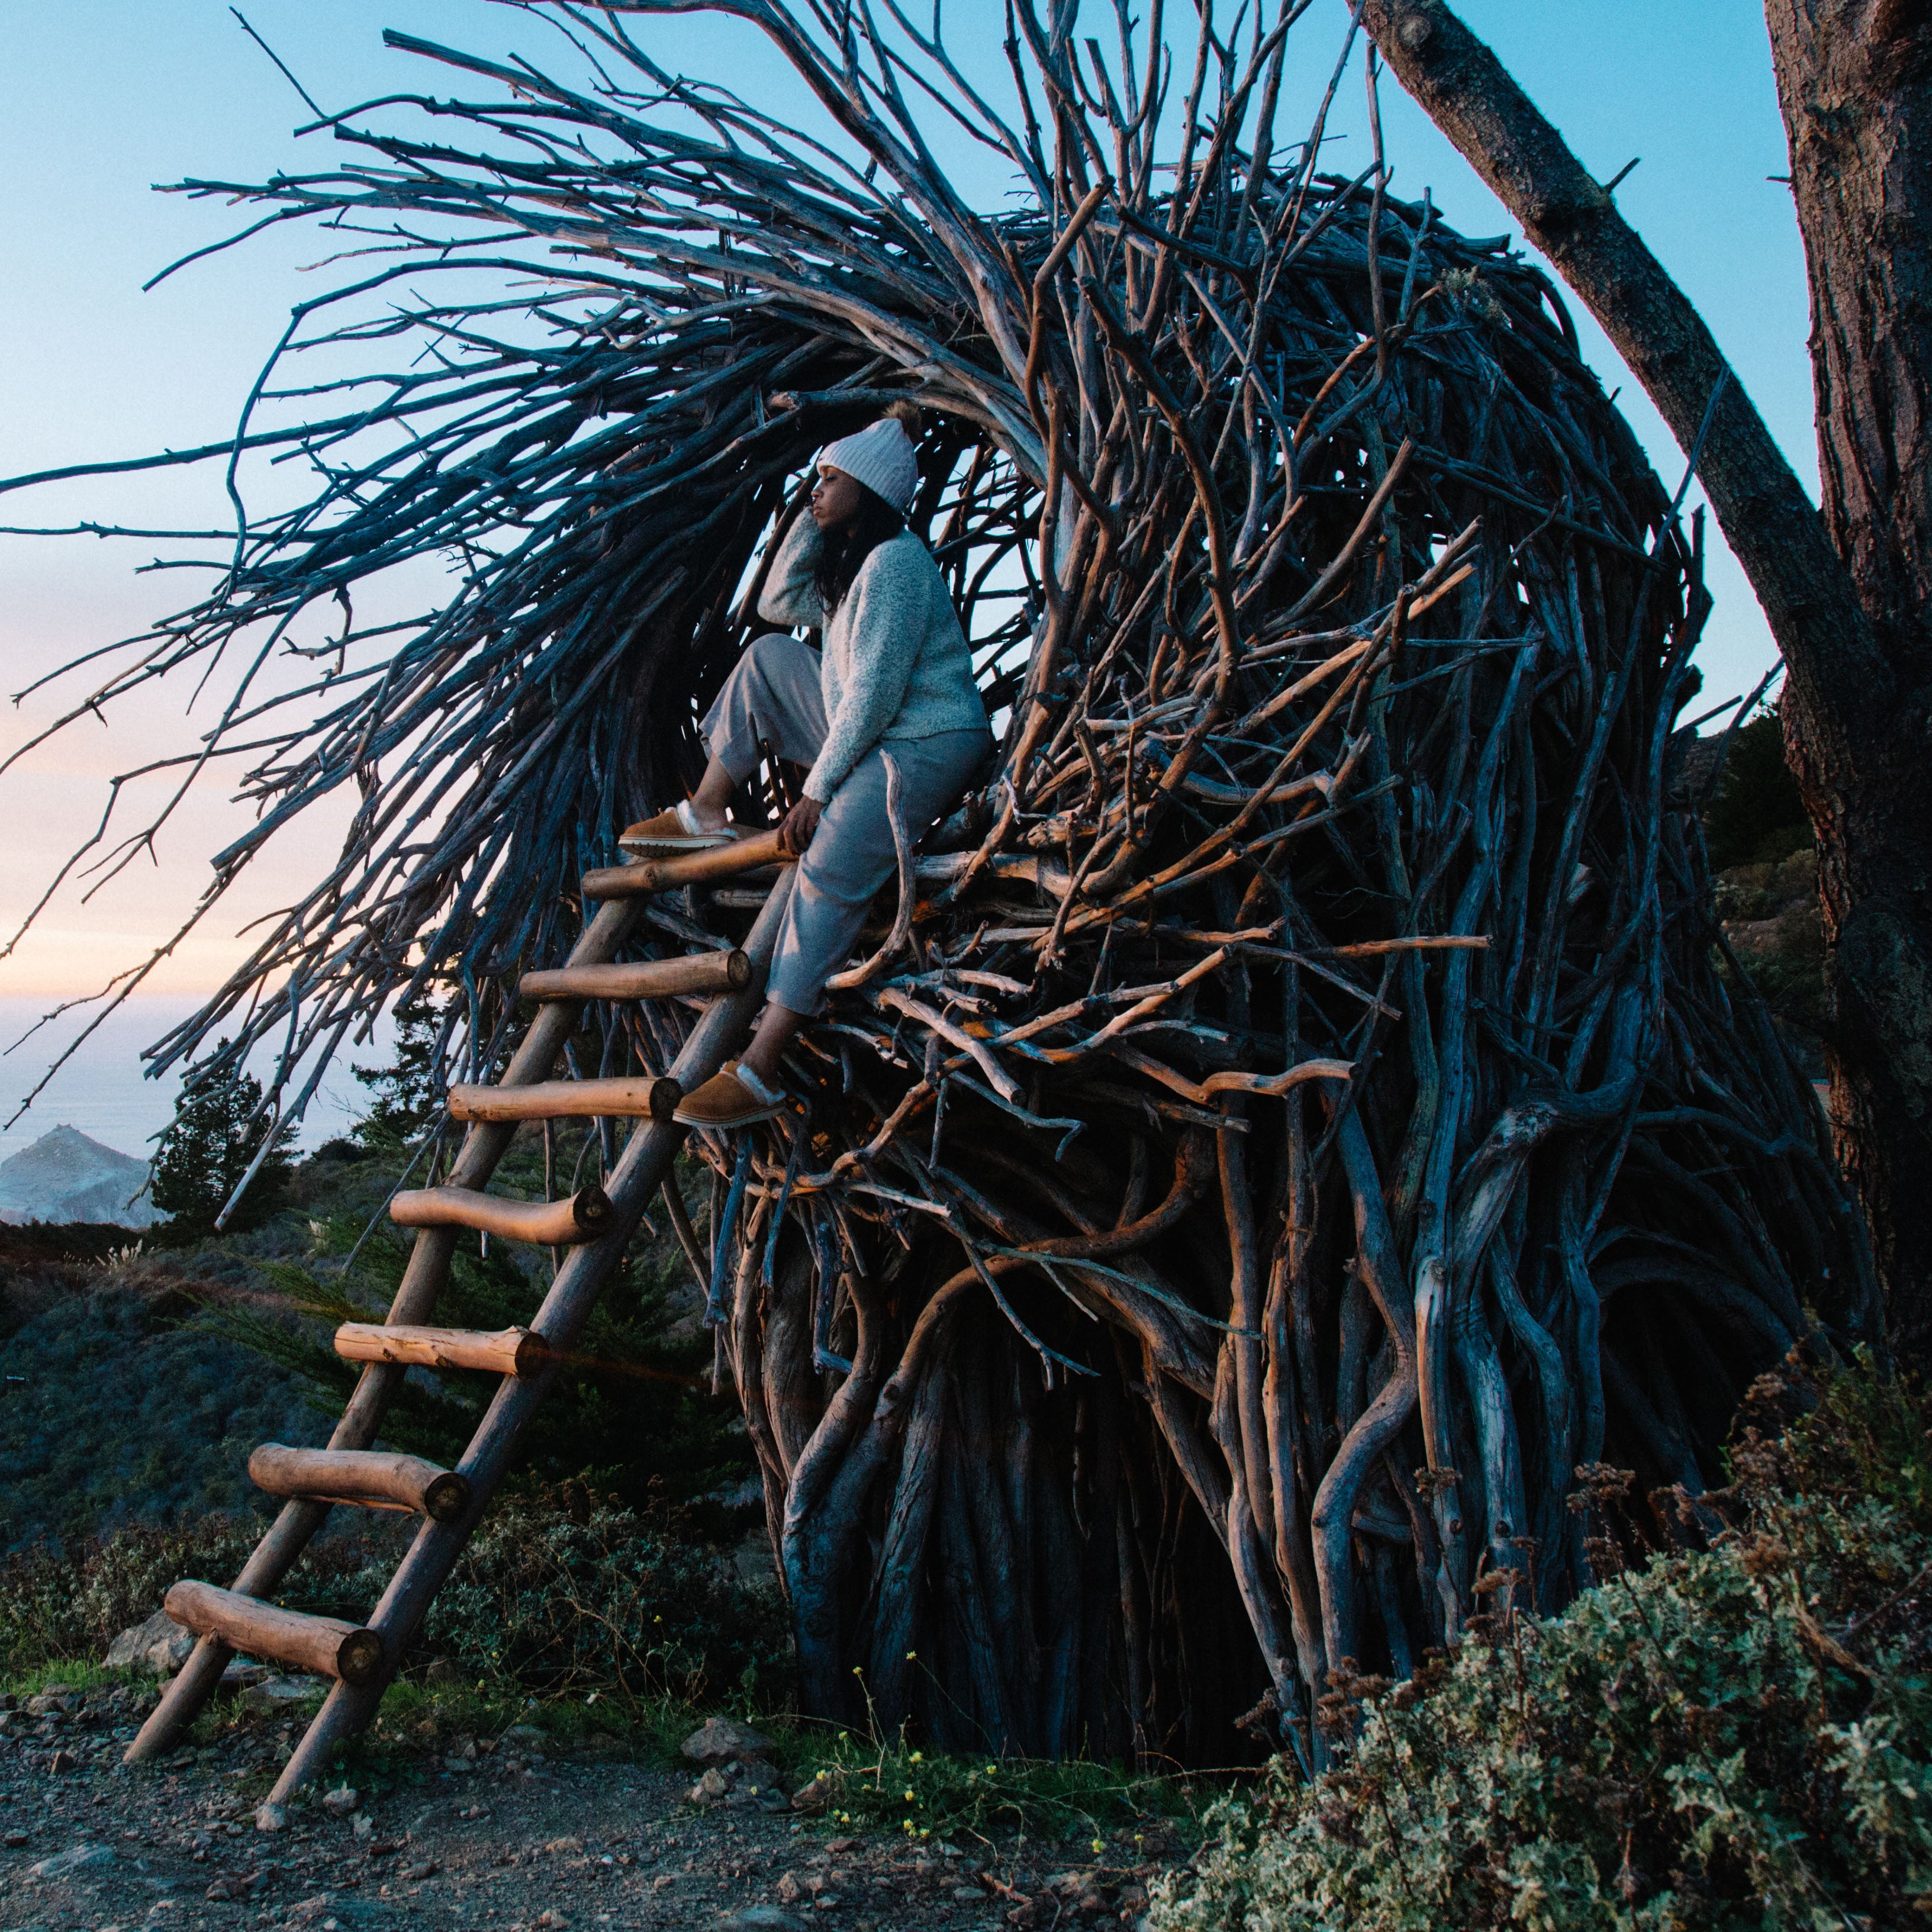 This Insta-Worthy Road Trip To Sleep in a Human Nest is Everything
